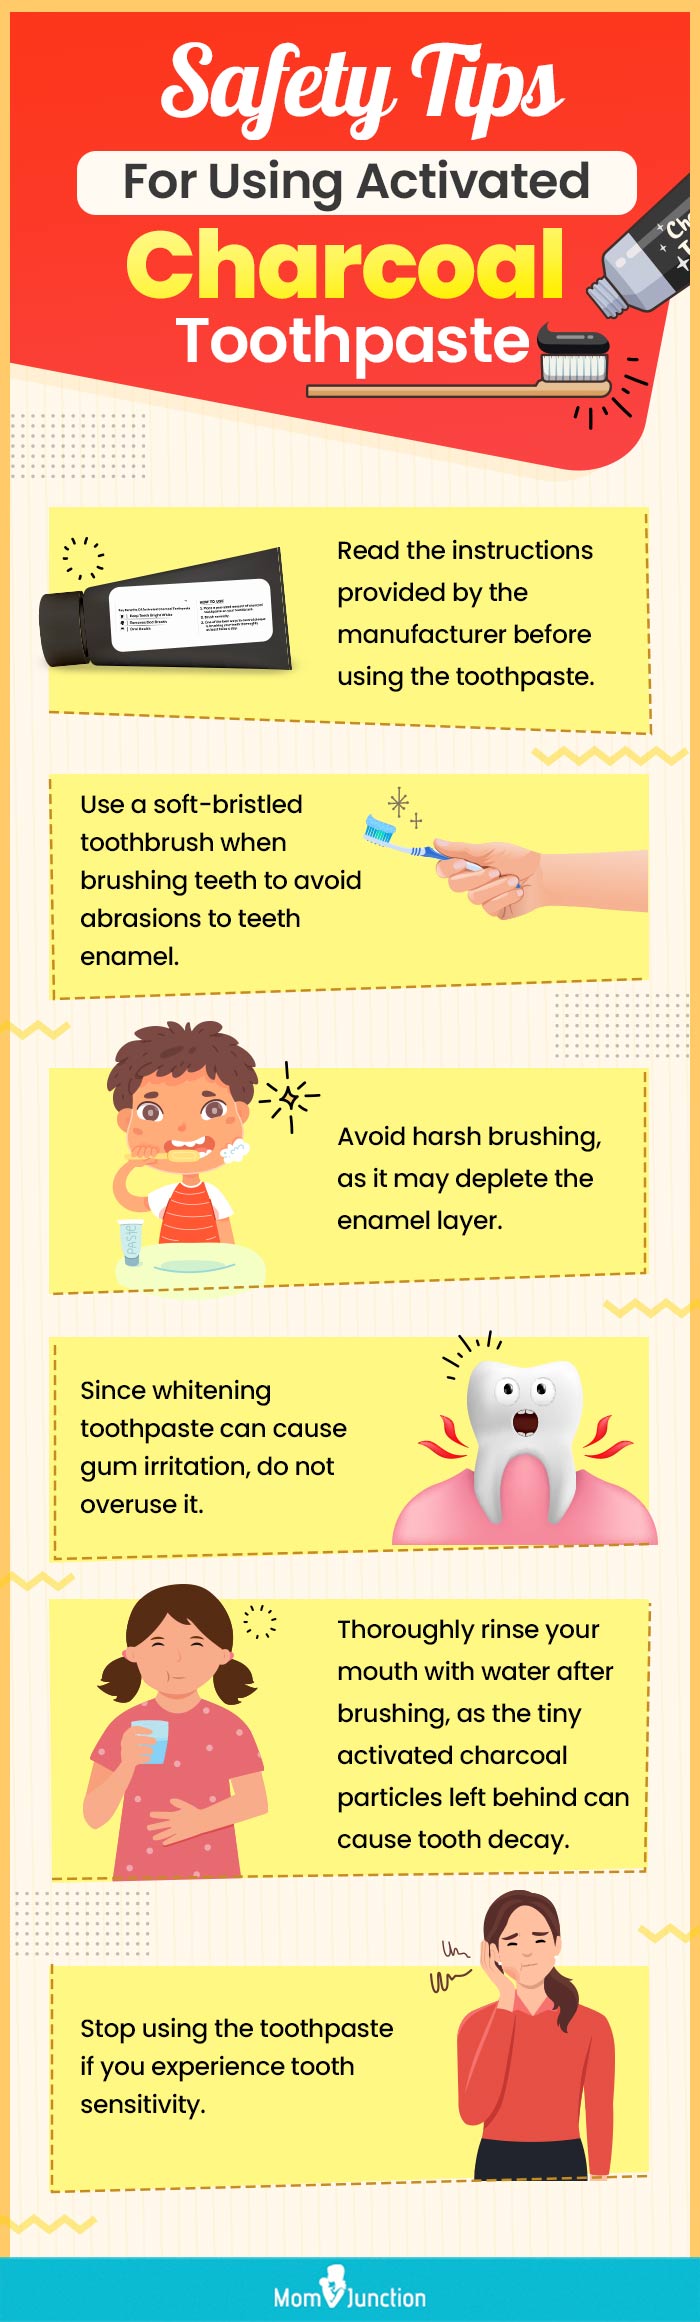 Safety-Tips-For-Using-Activated-Charcoal-Toothpaste (infographic)